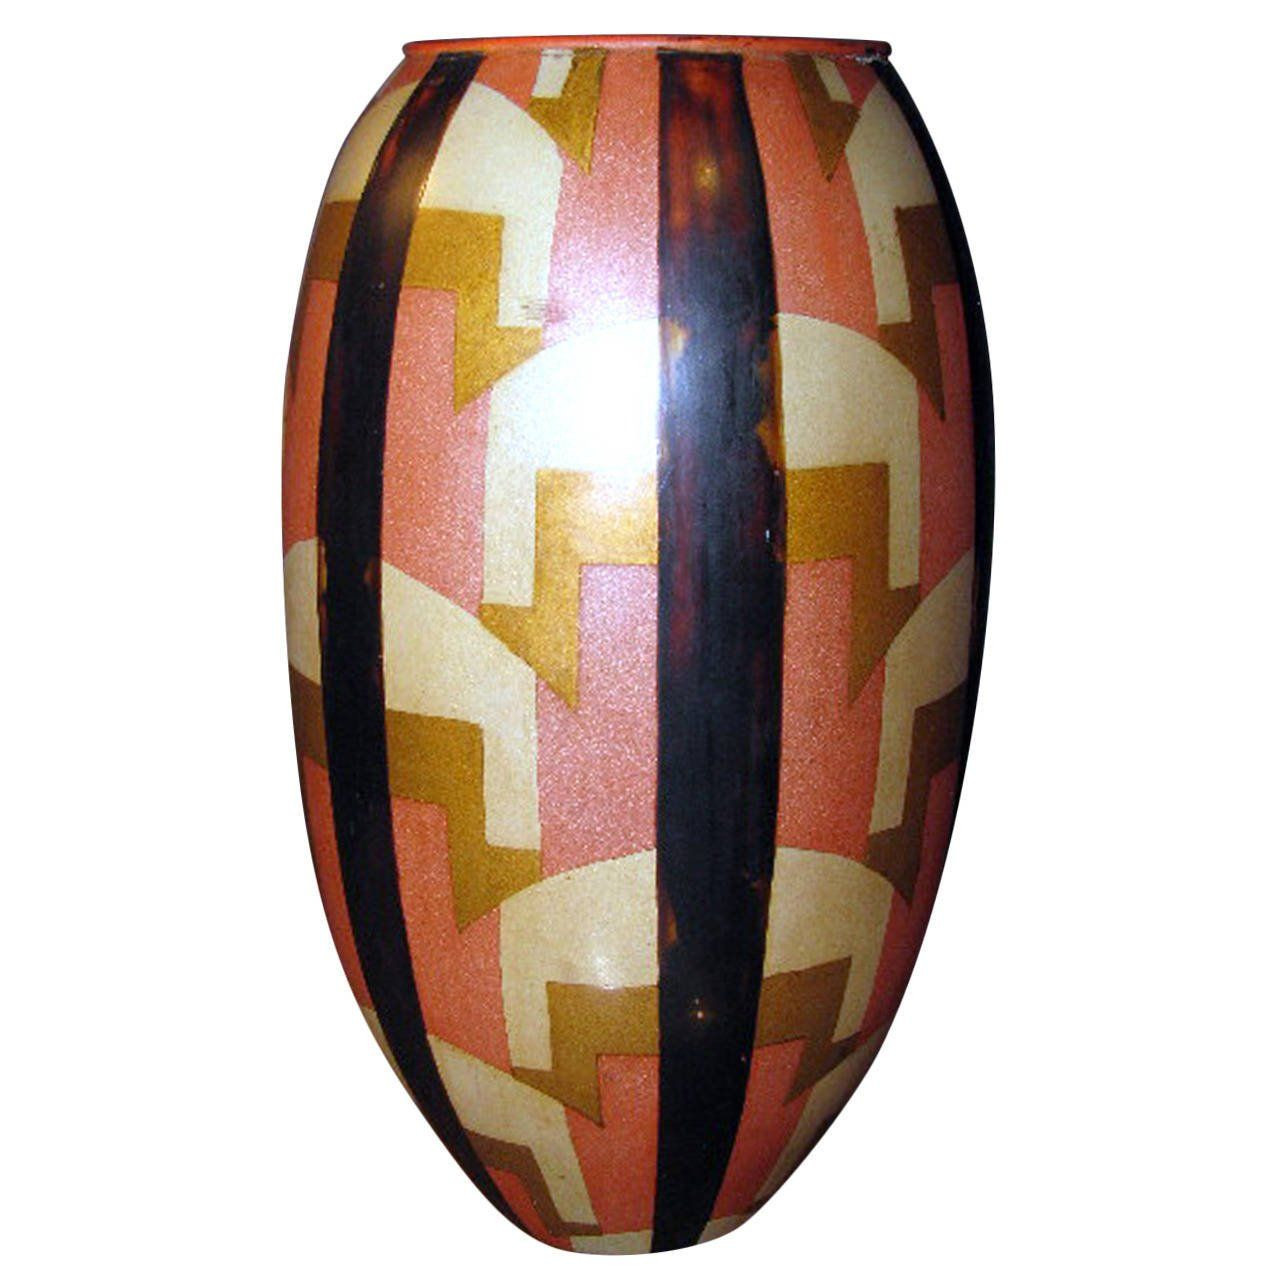 13 attractive Egg Shaped Vase 2024 free download egg shaped vase of egg shaped lacquer vase pinterest decorative objects and modern in egg shaped lacquer vase from a unique collection of antique and modern vases and vessels at